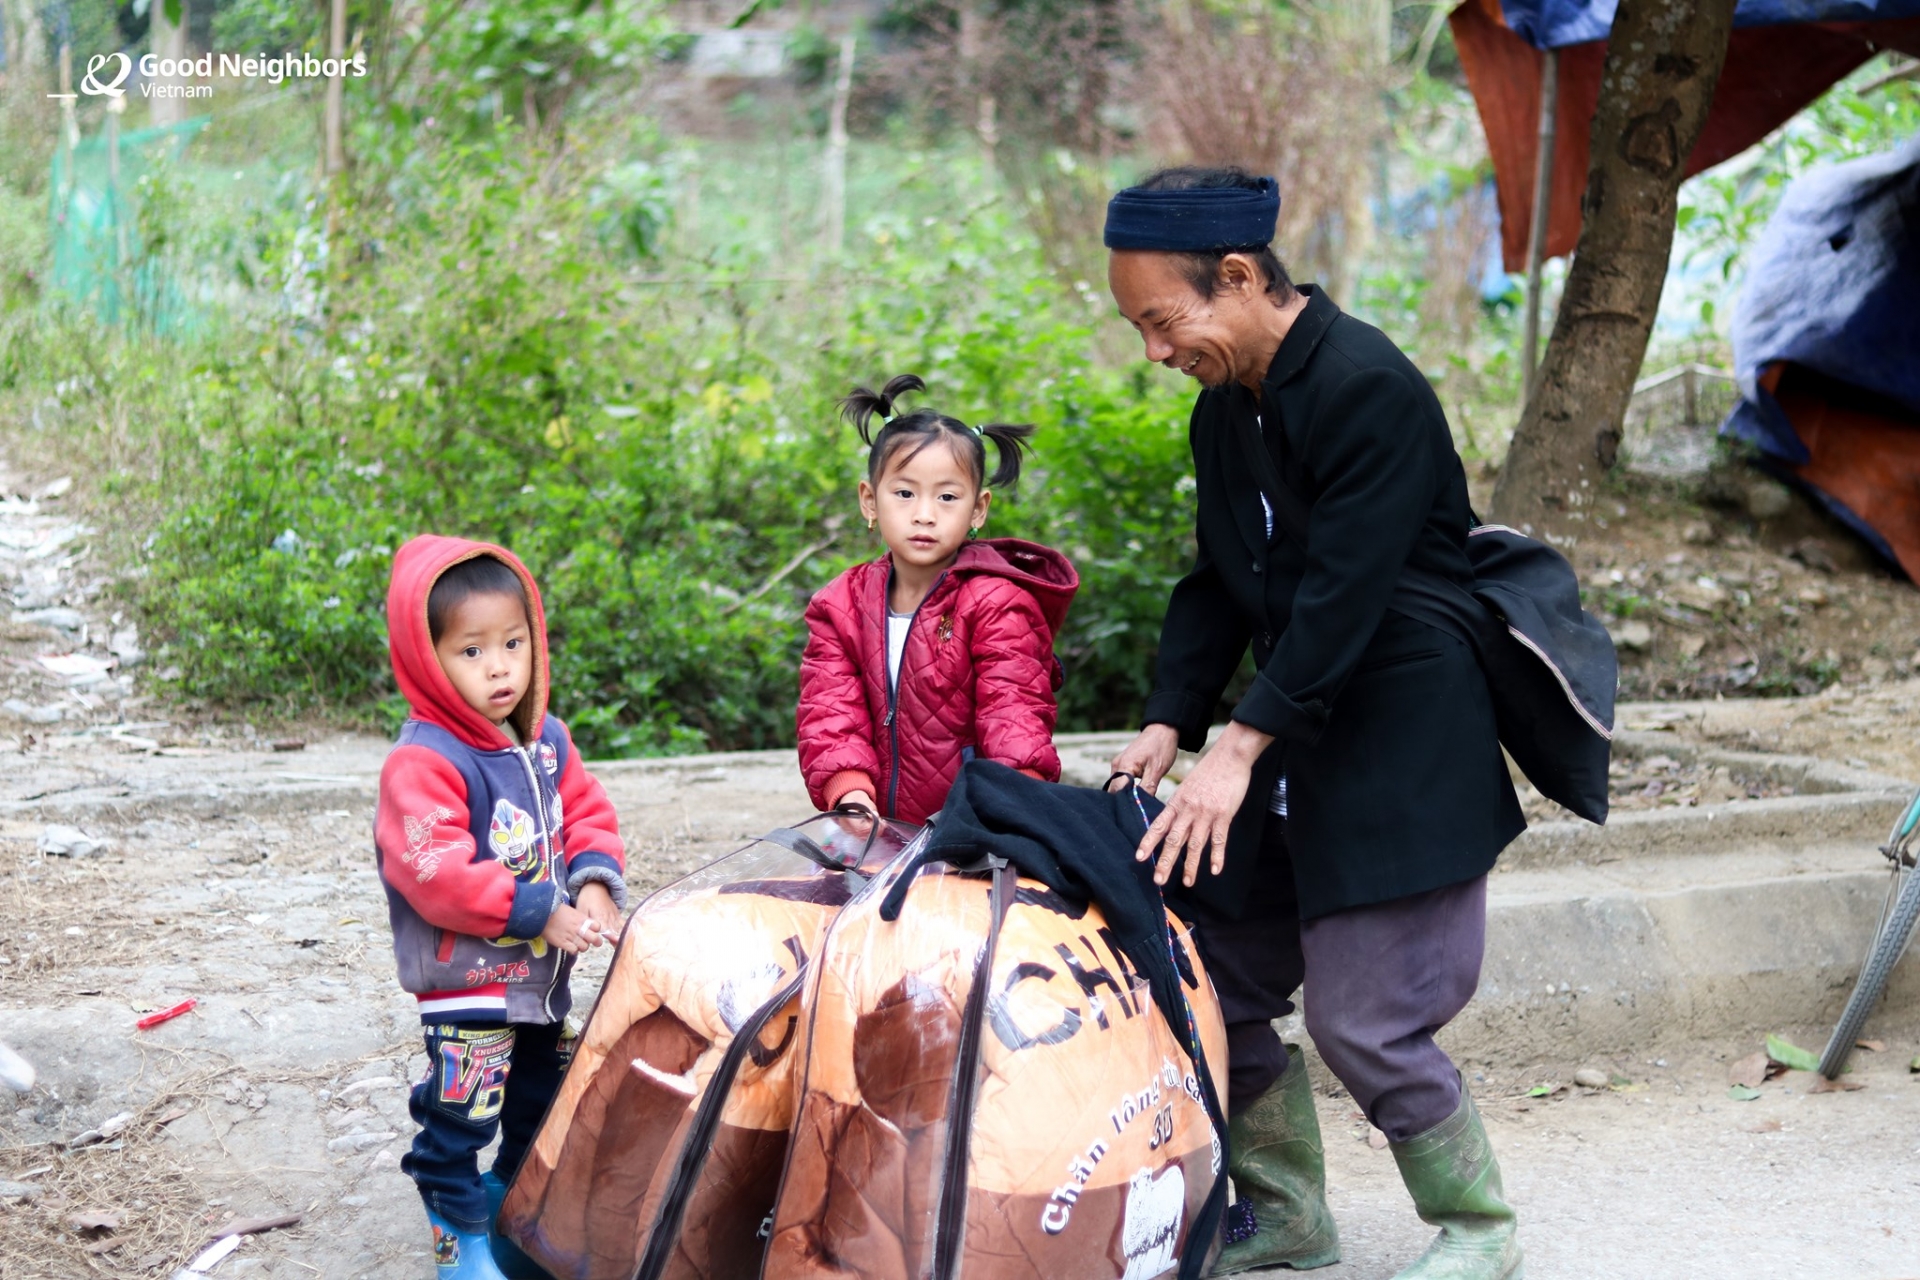 Blankets given to needy children in Vietnam before cold spell sets in